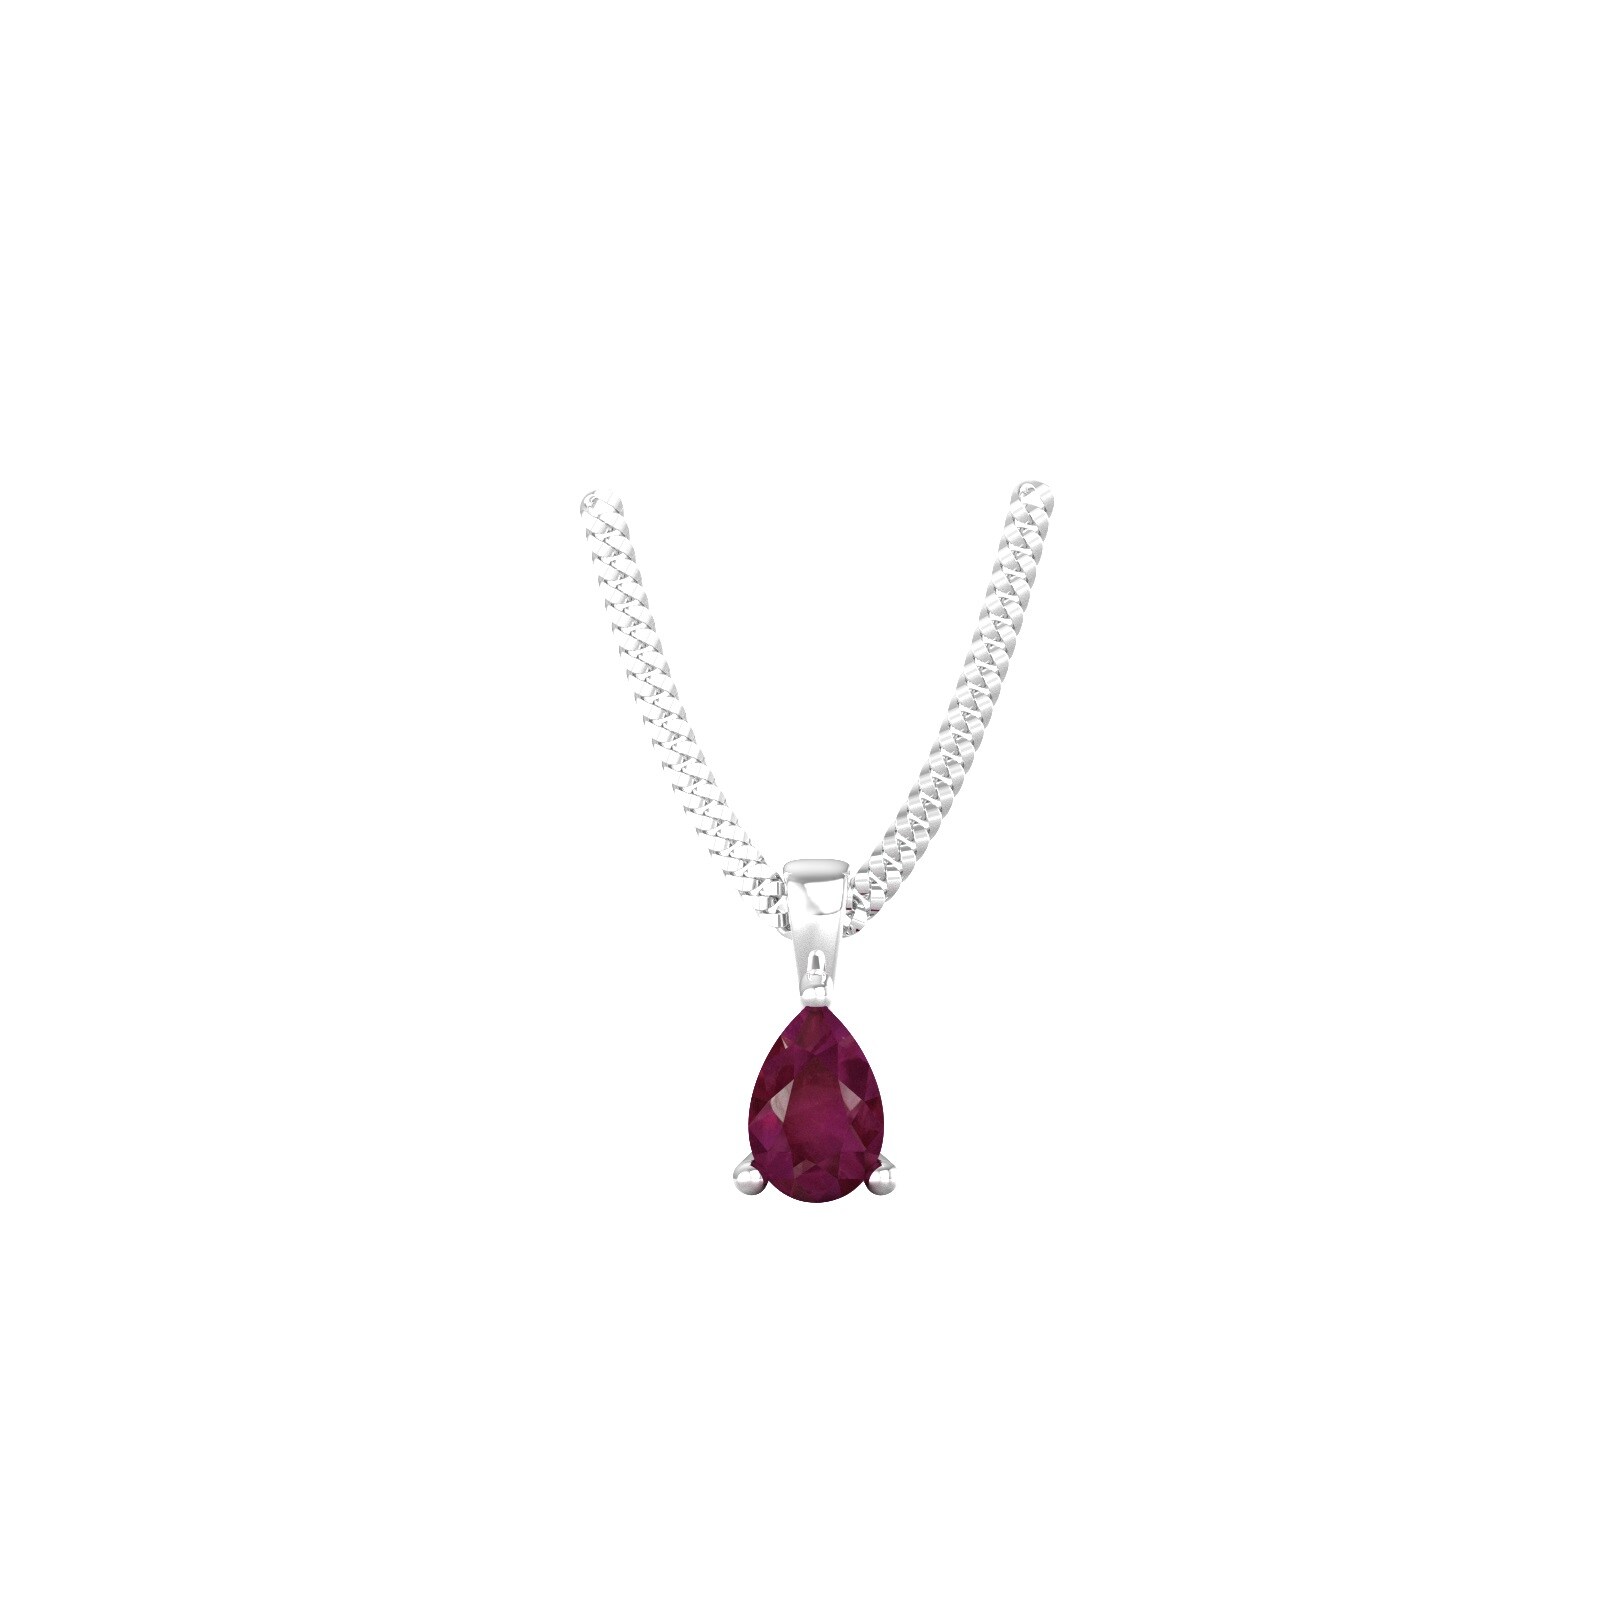 9ct White Gold 4 Claw Pear Cut Ruby Pendant & Chain